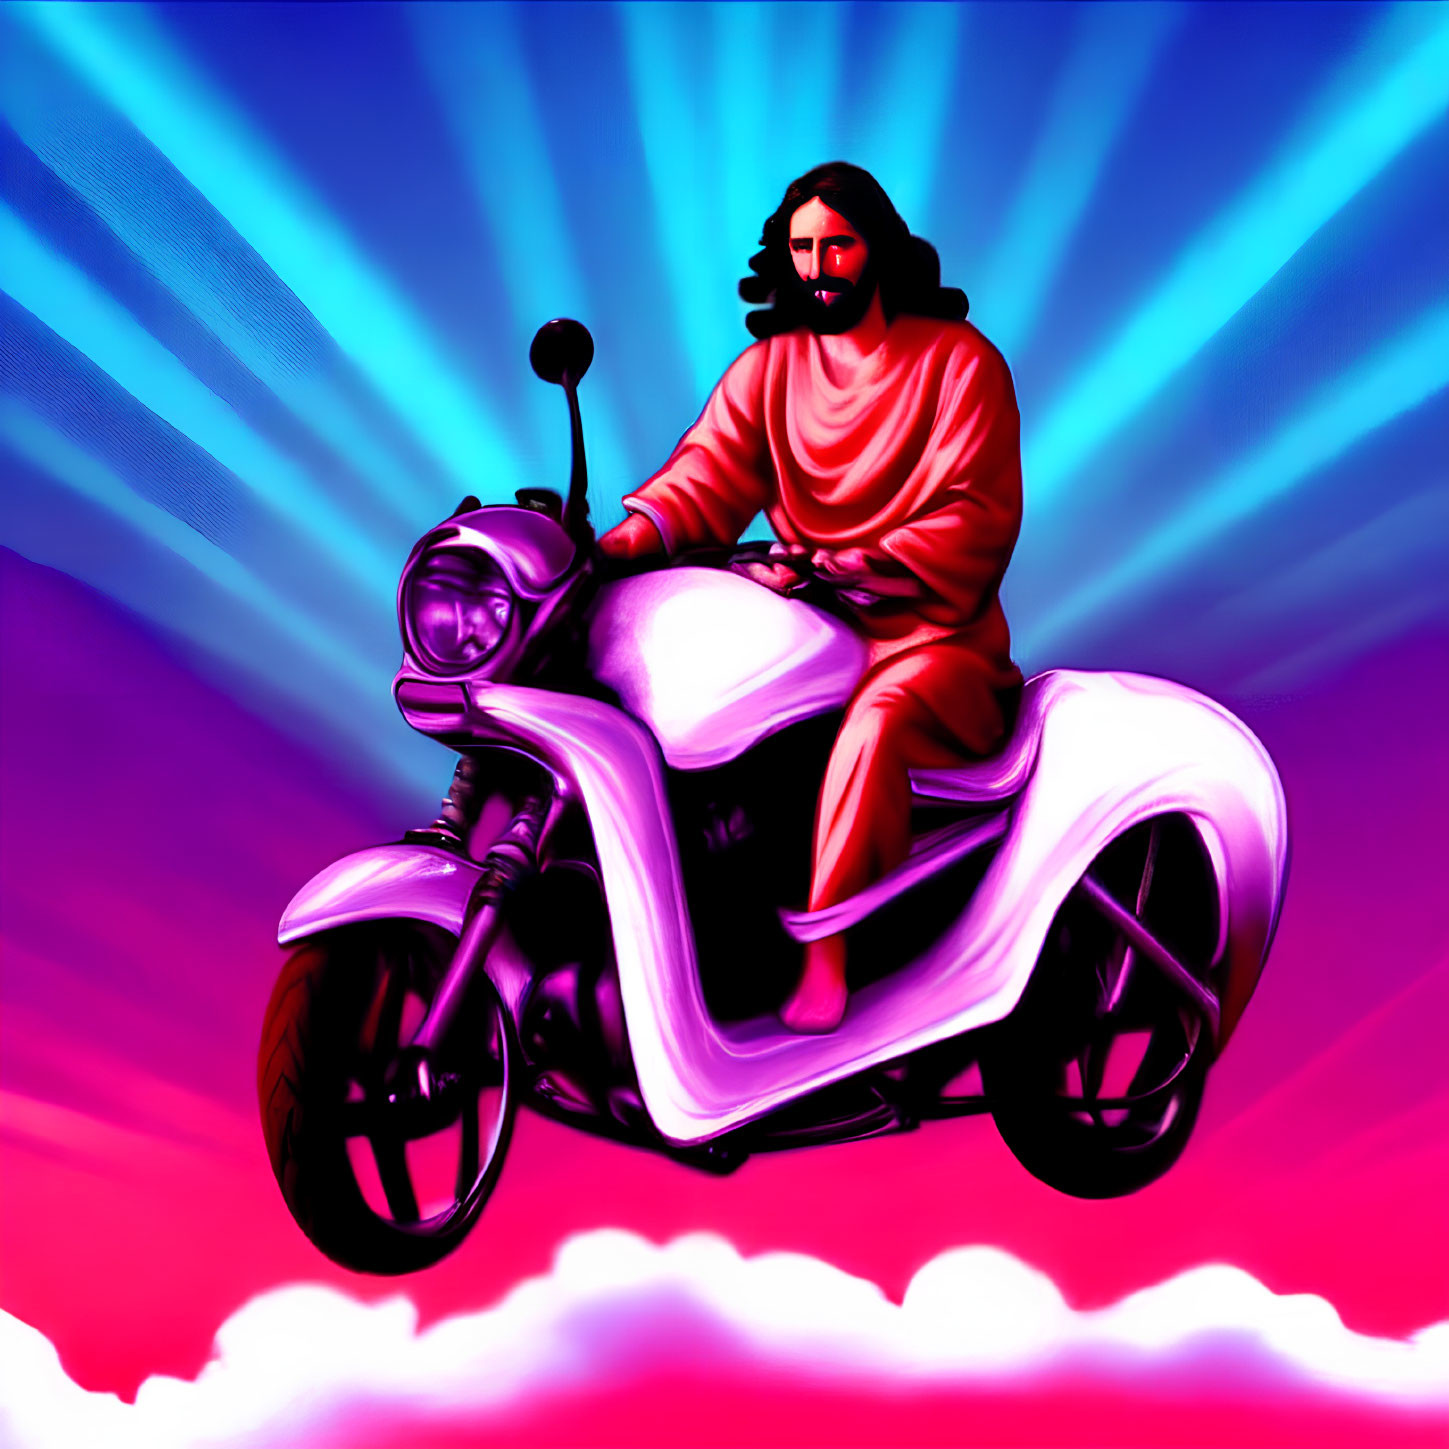 Figure in robe on motorcycle against colorful backdrop with rays